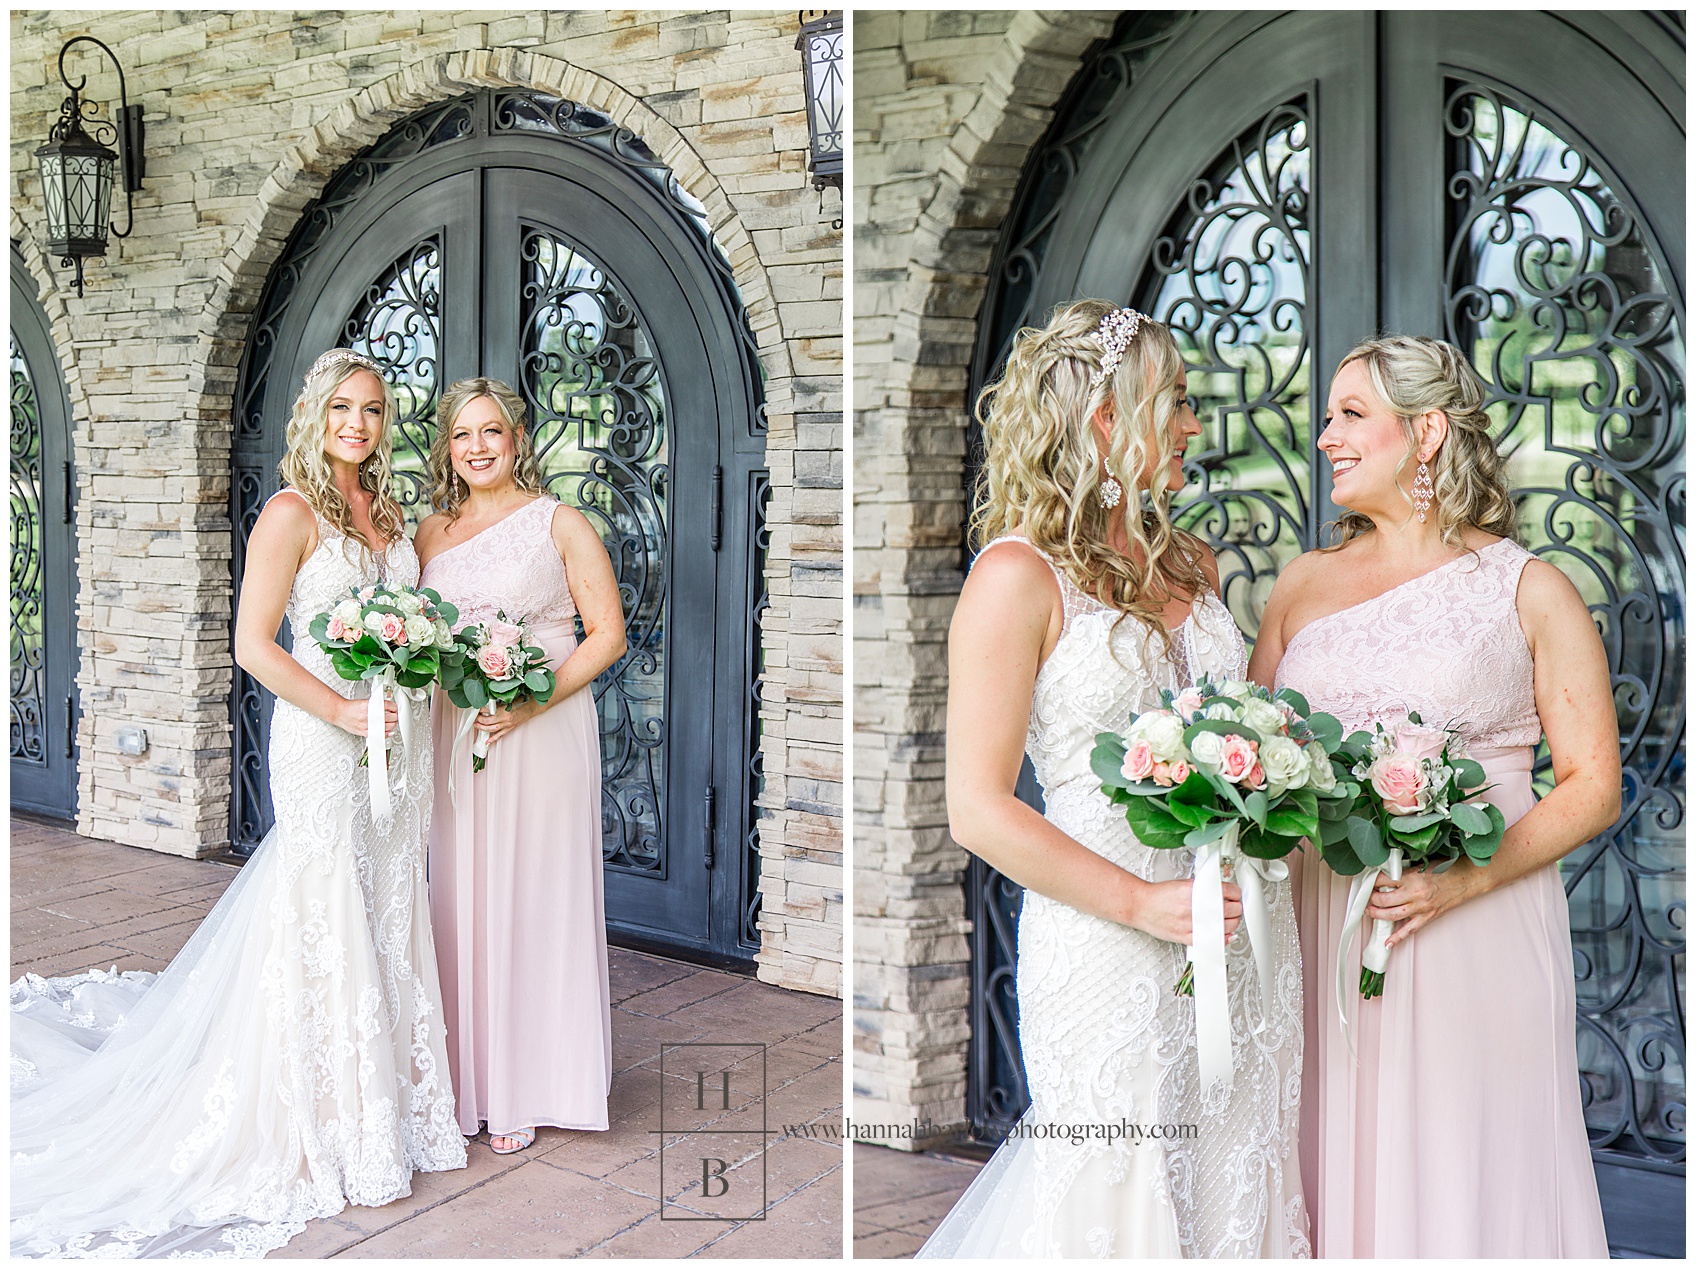 Bride and Mother of the Bride at Bella Amore in Dennison Ohio